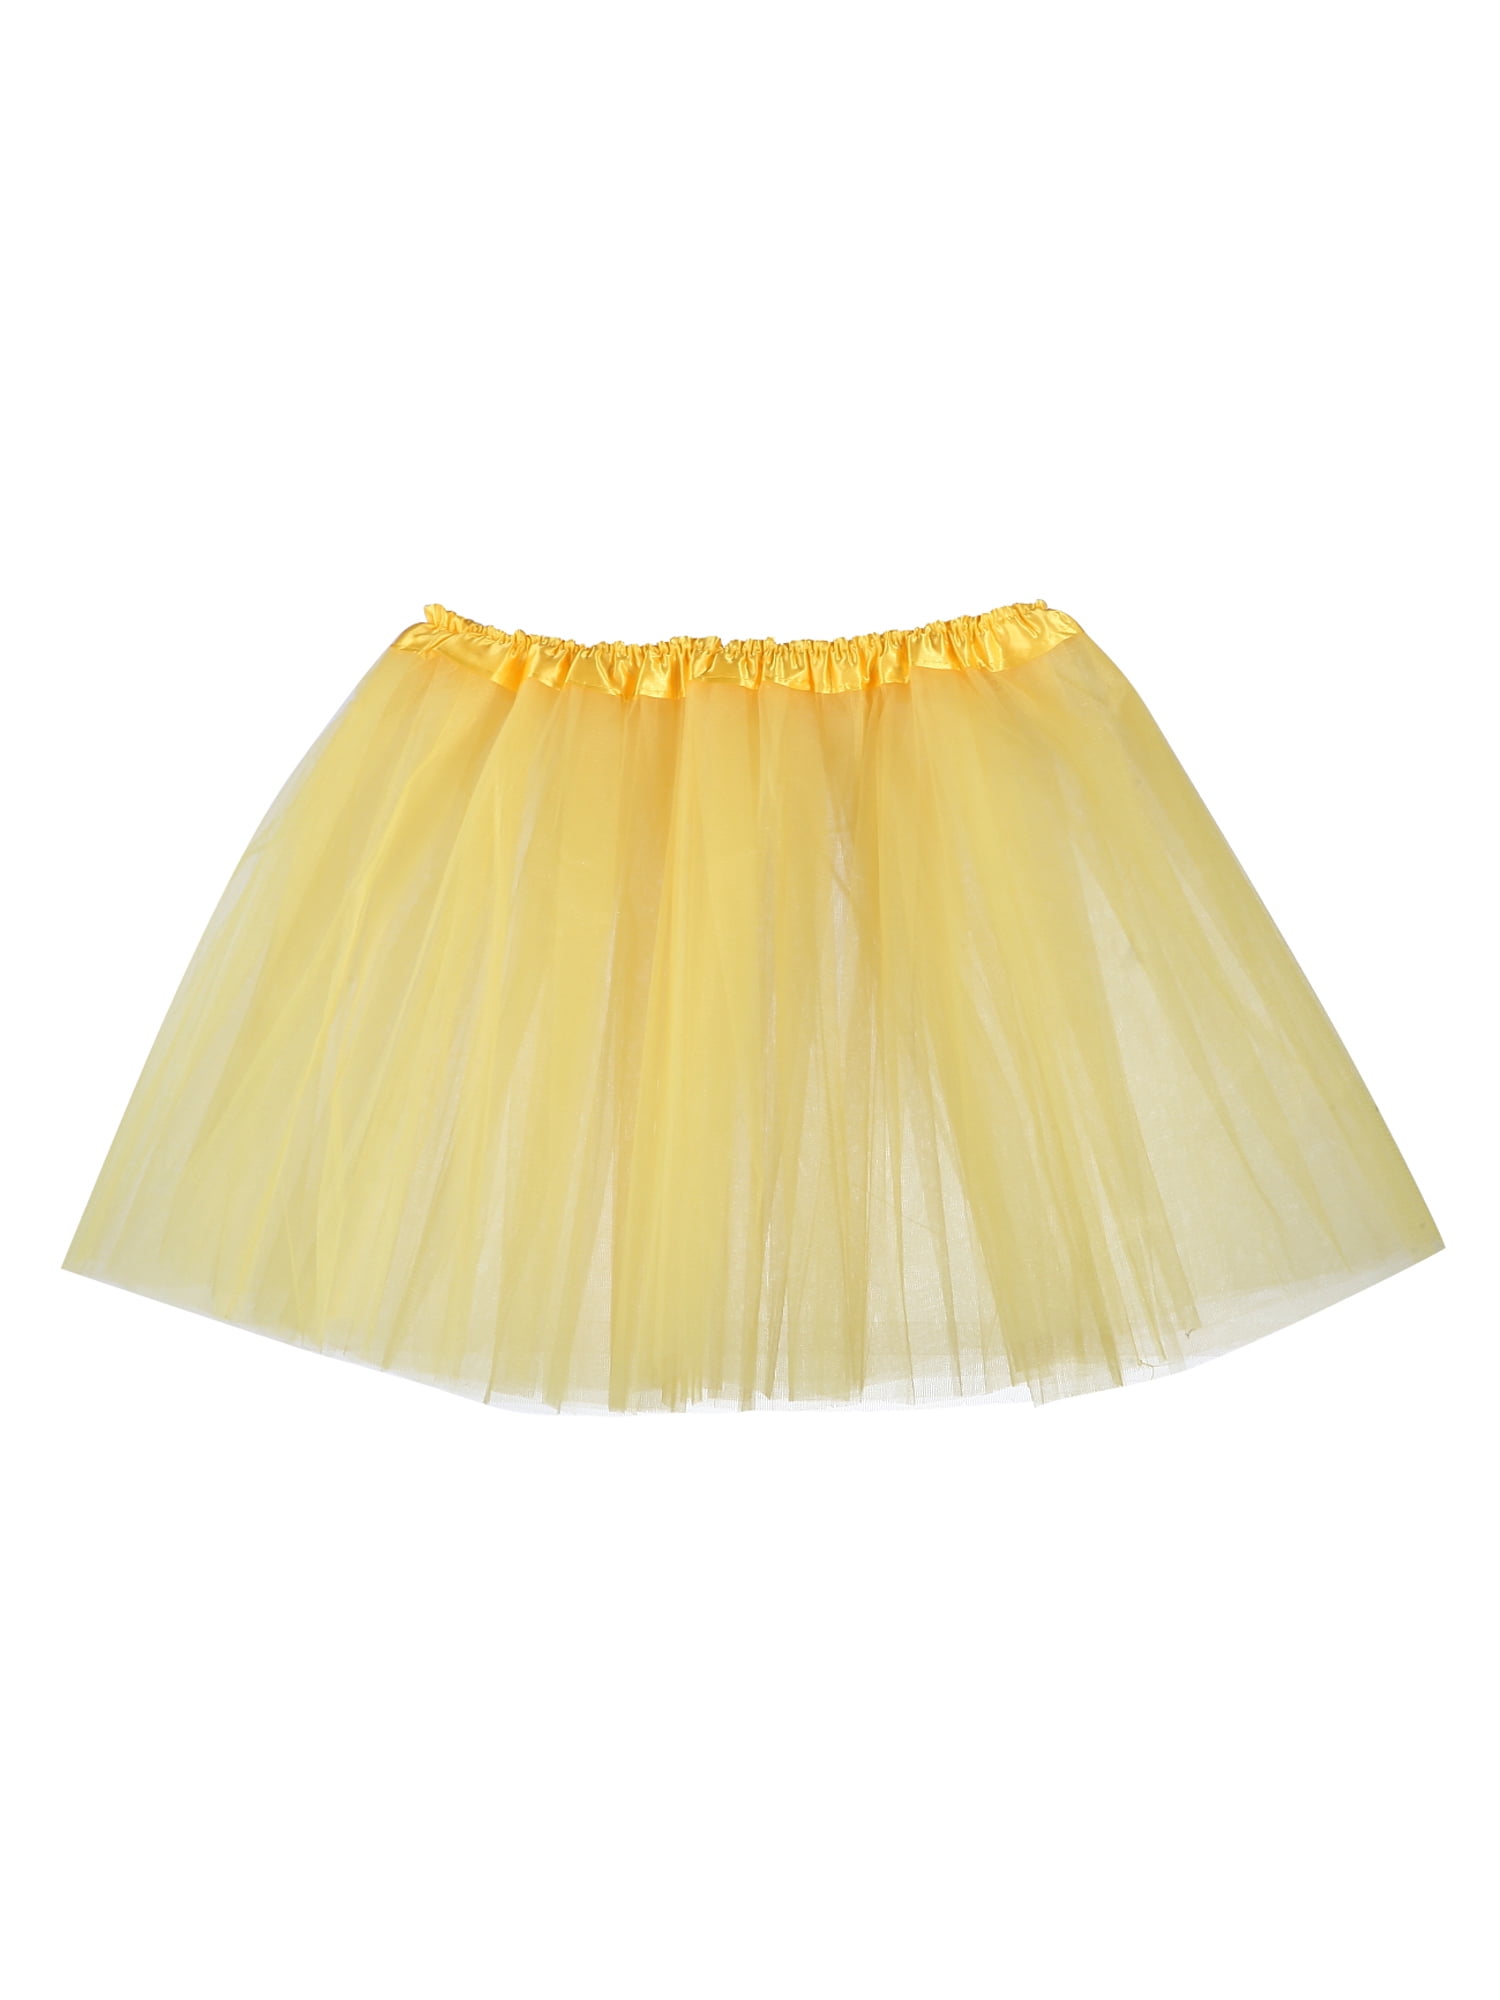 Pink,Black,Purple,Blue,Red,Orange,Green,White,Yellow Childs Tutu Skirt All Ages 